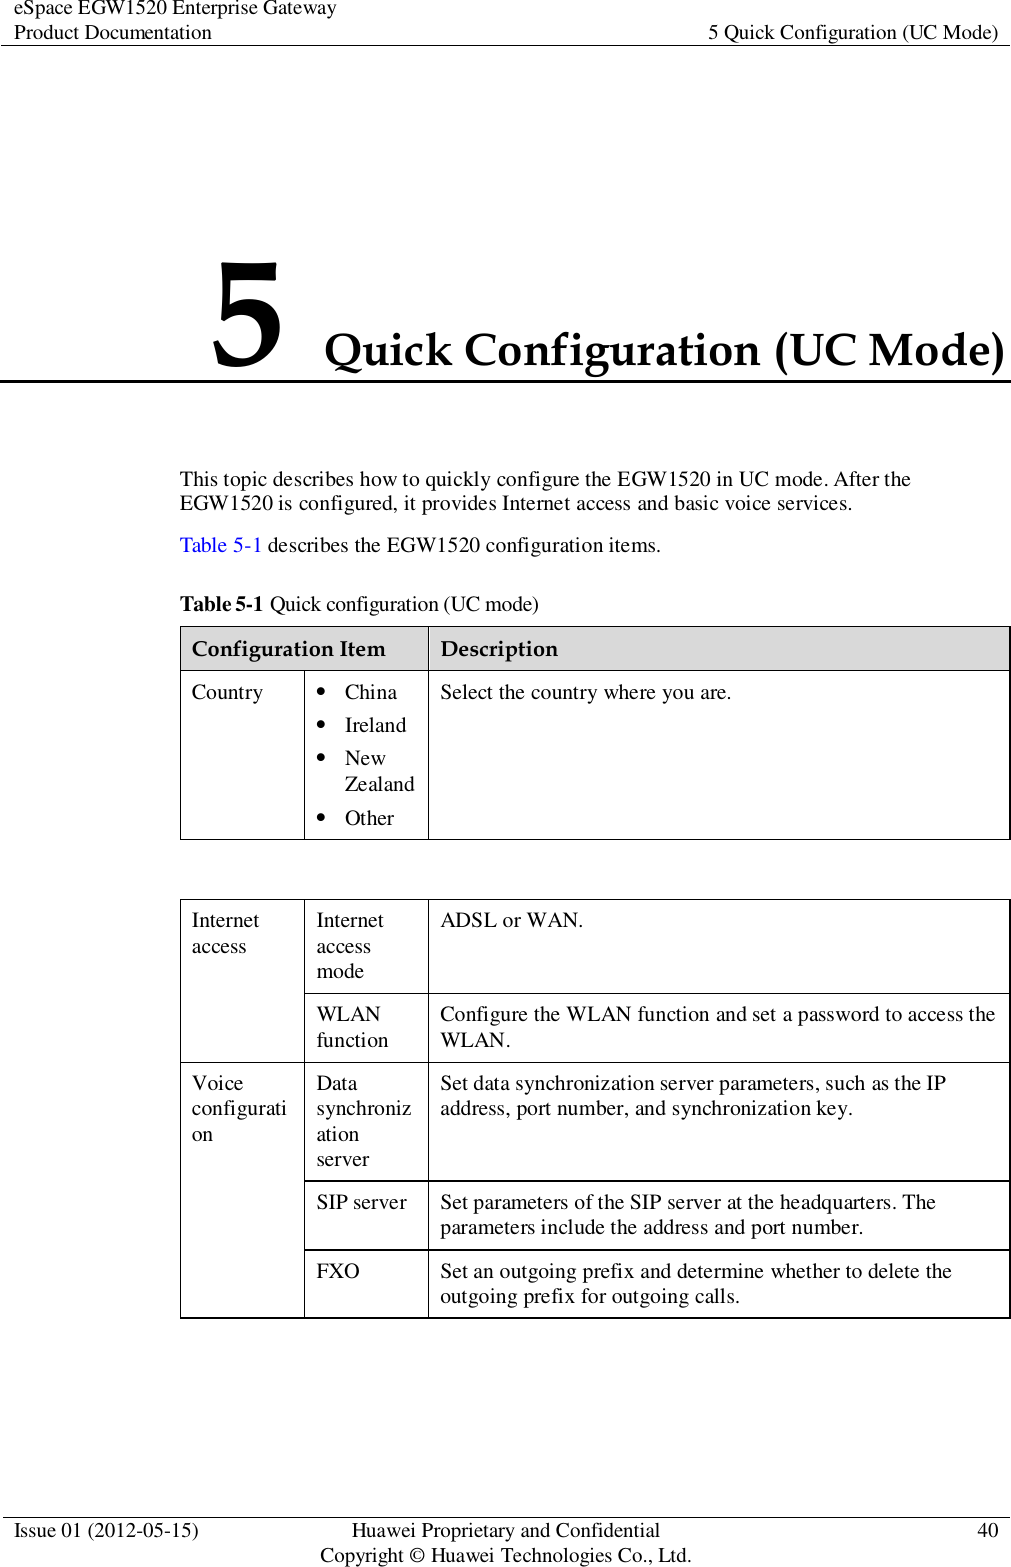 eSpace EGW1520 Enterprise Gateway Product Documentation 5 Quick Configuration (UC Mode)  Issue 01 (2012-05-15) Huawei Proprietary and Confidential                                     Copyright © Huawei Technologies Co., Ltd. 40  5 Quick Configuration (UC Mode) This topic describes how to quickly configure the EGW1520 in UC mode. After the EGW1520 is configured, it provides Internet access and basic voice services. Table 5-1 describes the EGW1520 configuration items. Table 5-1 Quick configuration (UC mode) Configuration Item Description Country  China  Ireland  New Zealand  Other Select the country where you are.  Internet access Internet access mode ADSL or WAN. WLAN function Configure the WLAN function and set a password to access the WLAN. Voice configuration Data synchronization server Set data synchronization server parameters, such as the IP address, port number, and synchronization key. SIP server Set parameters of the SIP server at the headquarters. The parameters include the address and port number. FXO Set an outgoing prefix and determine whether to delete the outgoing prefix for outgoing calls.  